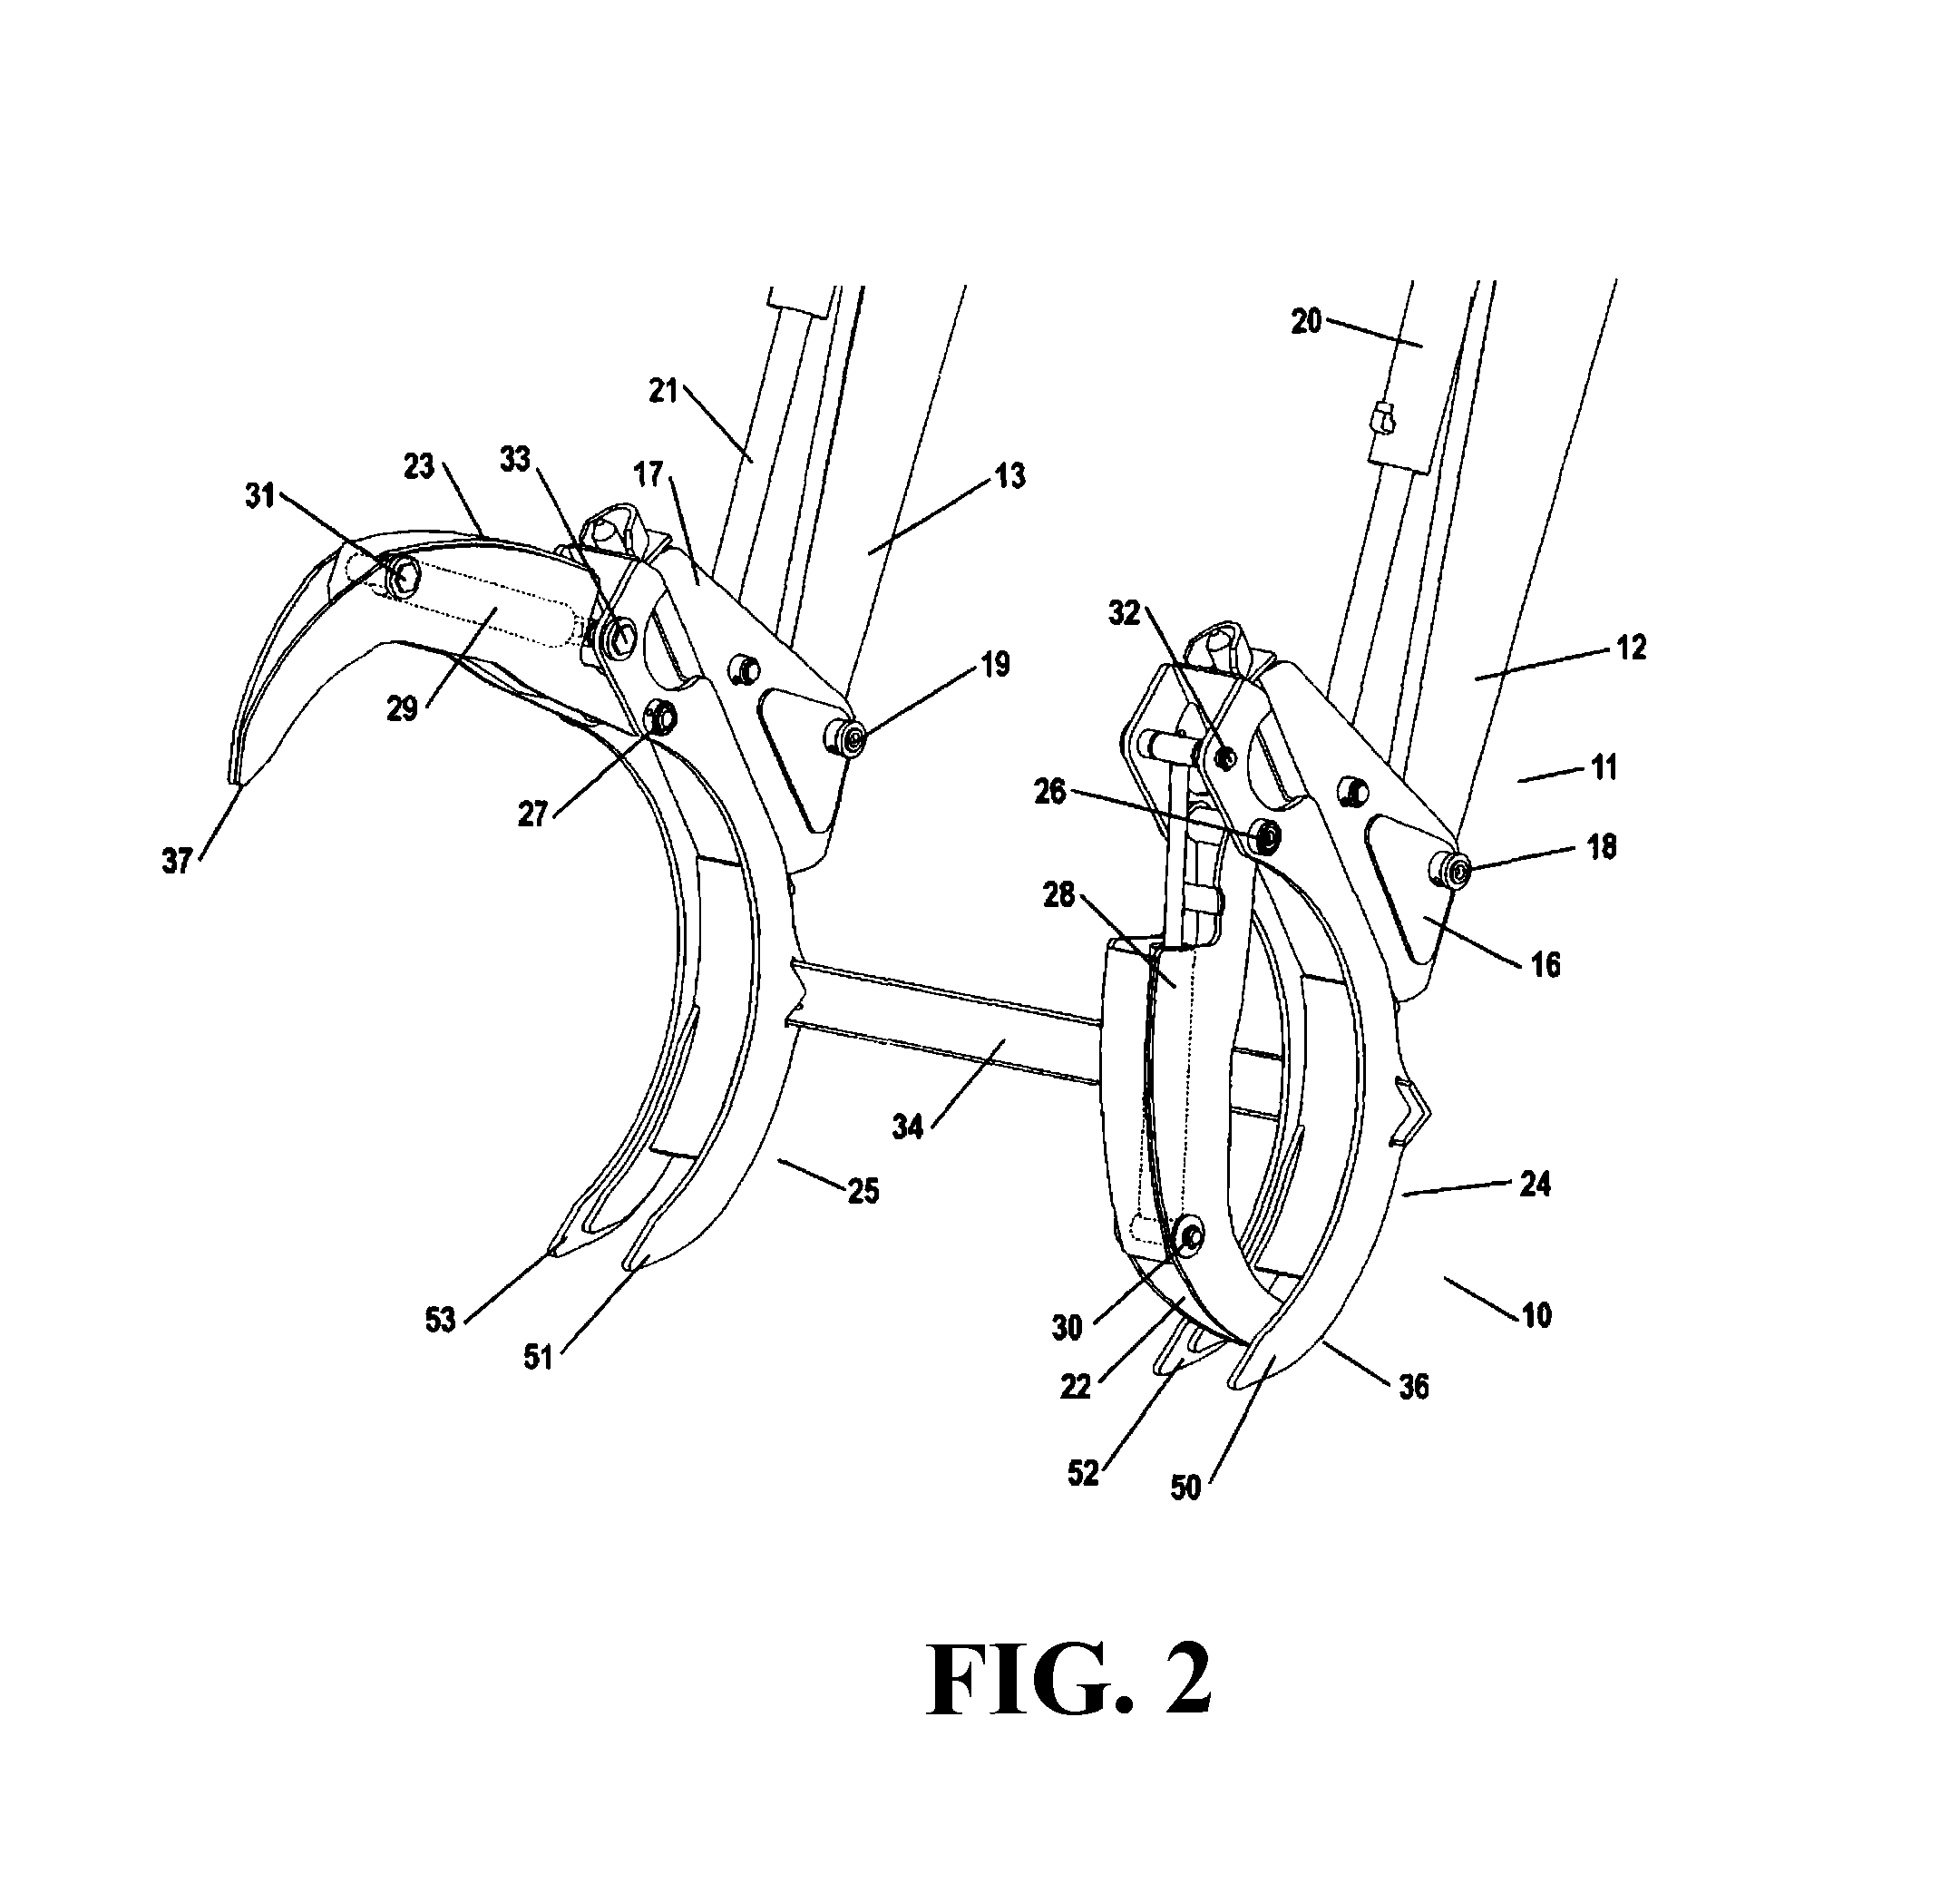 Independent hydraulic pinching fingers with detachable secondary implement